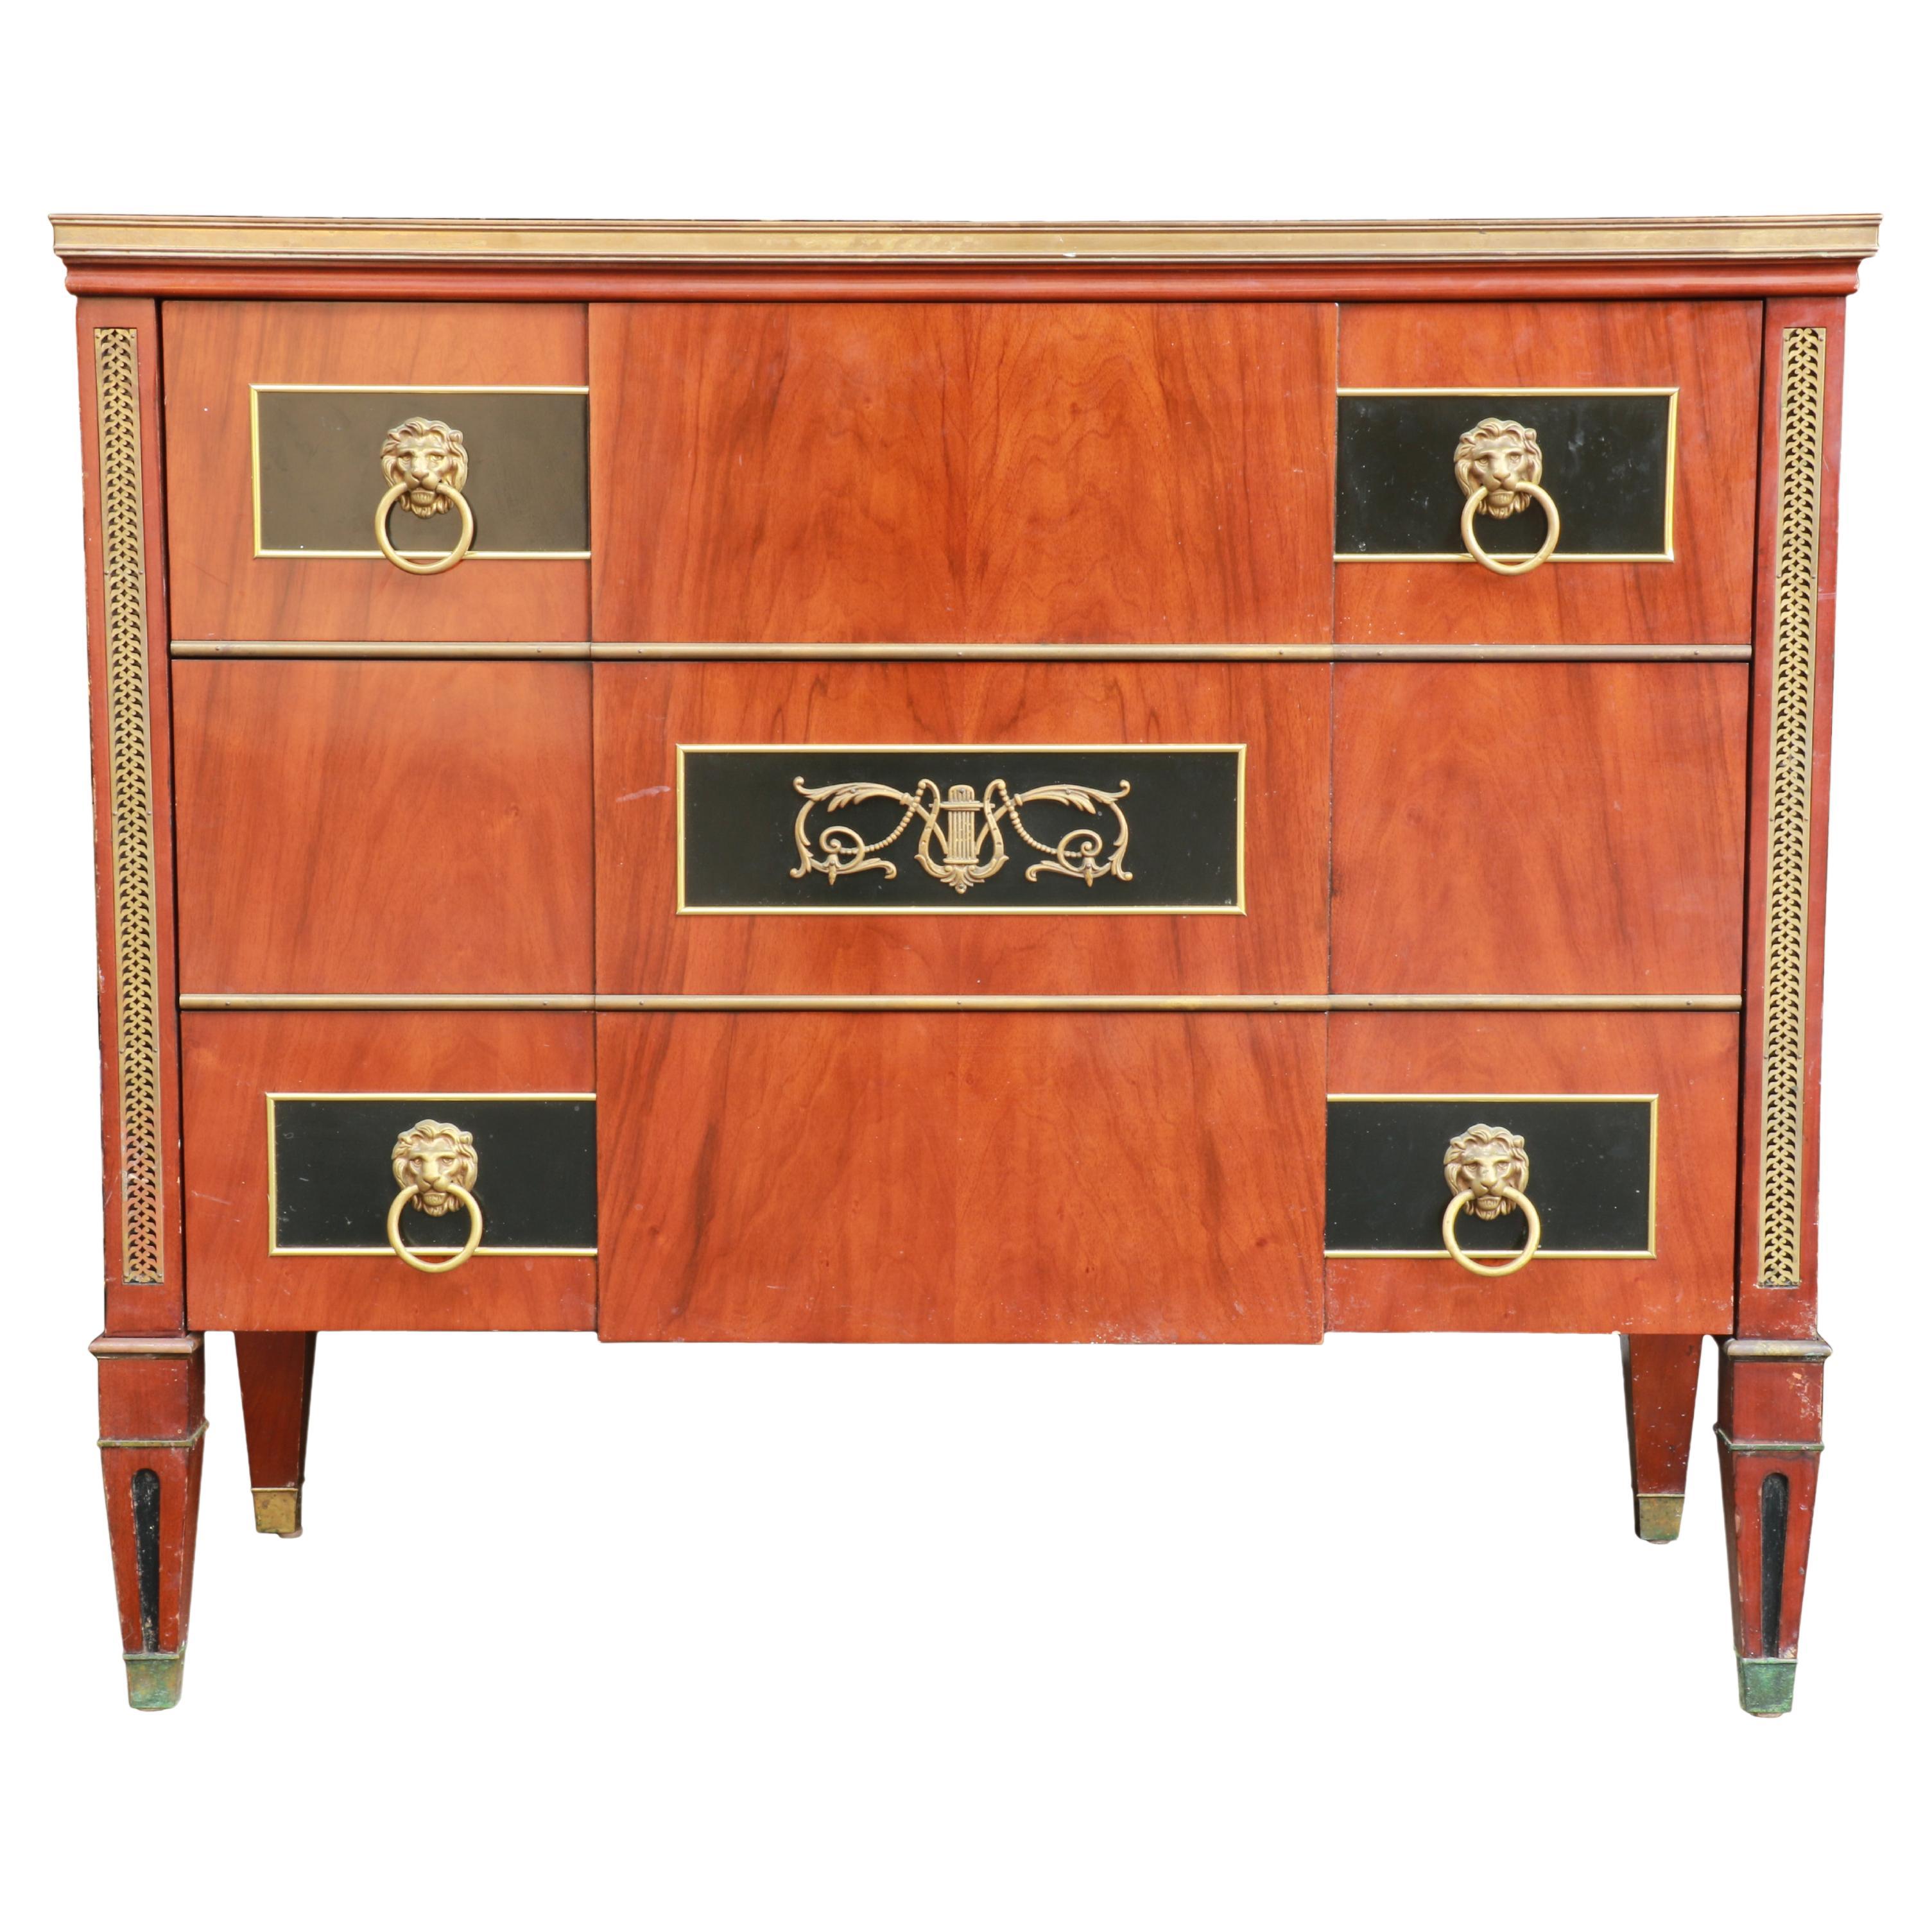 This is the most exciting, refined French style, neo classical chest of drawers by John Widdicomb with a marble top and three drawers. I am absolutely obsessed with the lion pulls, wood finish, drawer dovetail joinery and brass detailing. The chest